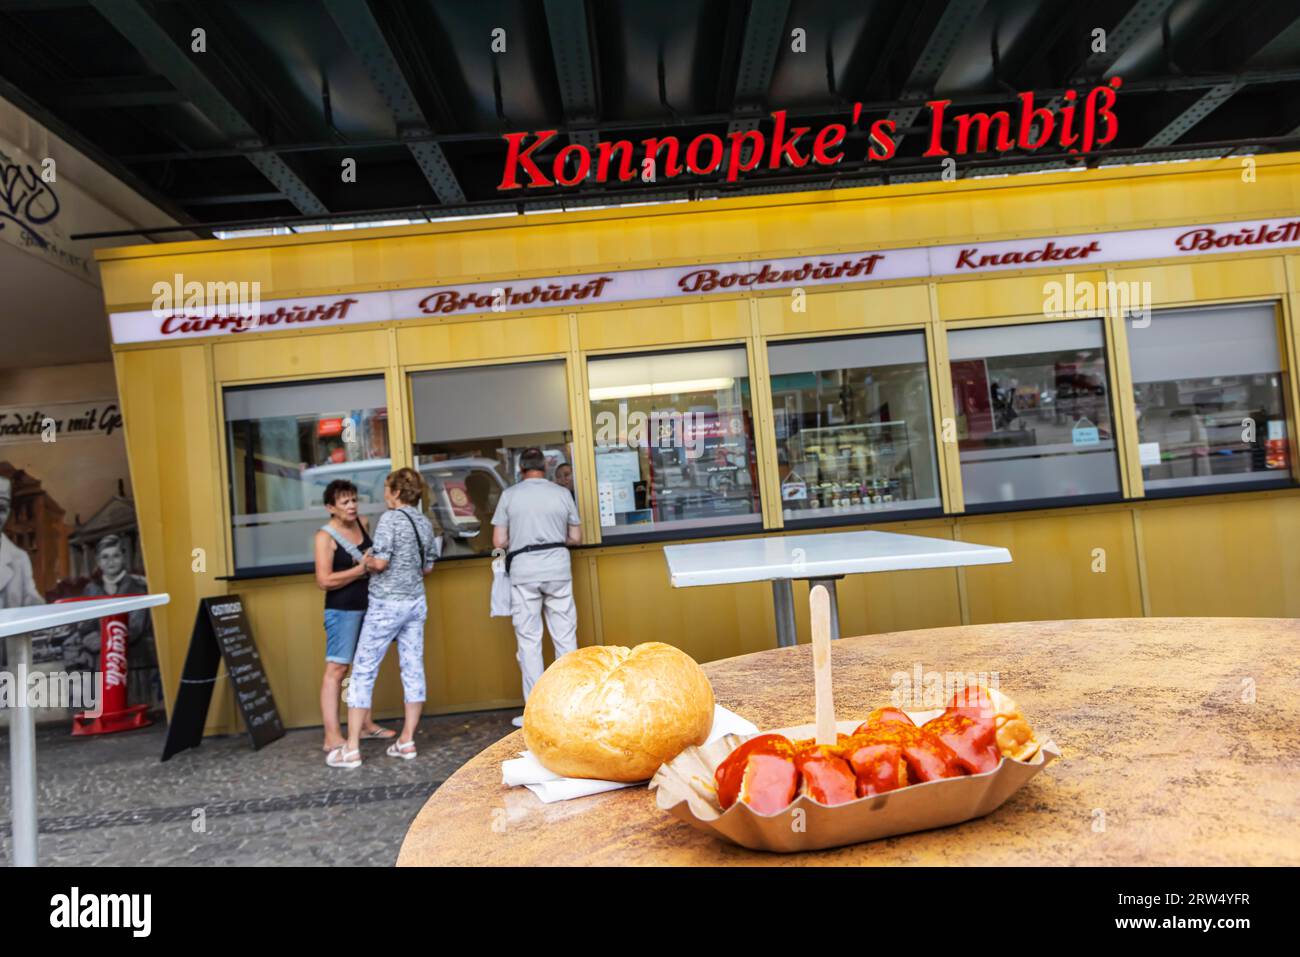 Konnopke's Imbissbuden, cult snack stand in Berlin's Prenzlauer Berg district. Konnopke's is considered the first snack stand in East Berlin, where Stock Photo